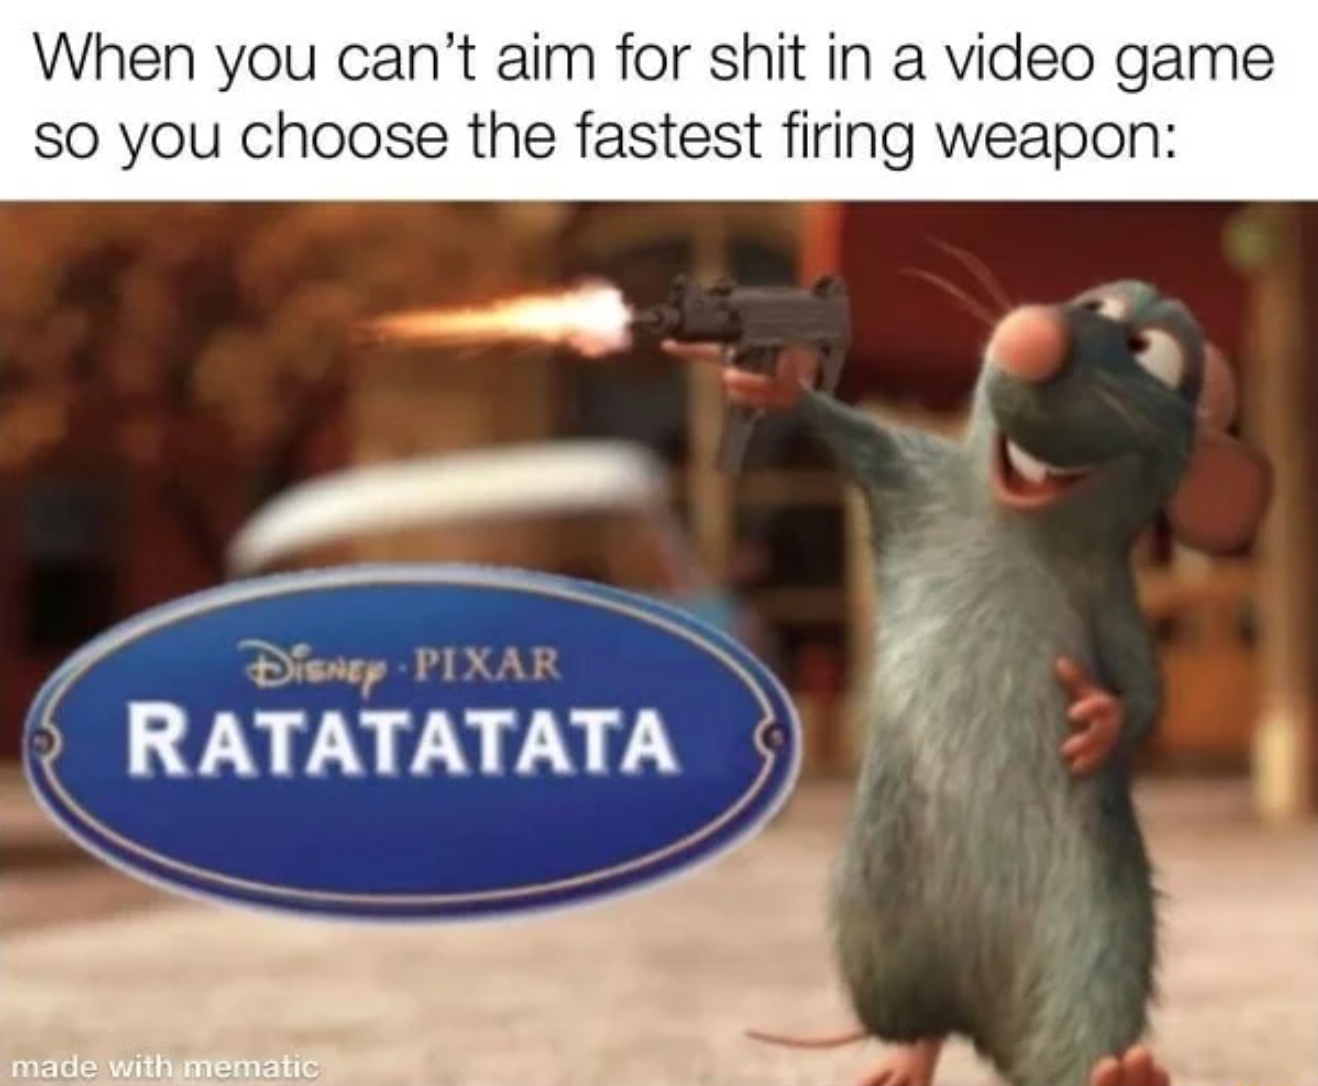 ratatatata meme - When you can't aim for shit in a video game so you choose the fastest firing weapon Disney Pixar Ratatatata made with mematic